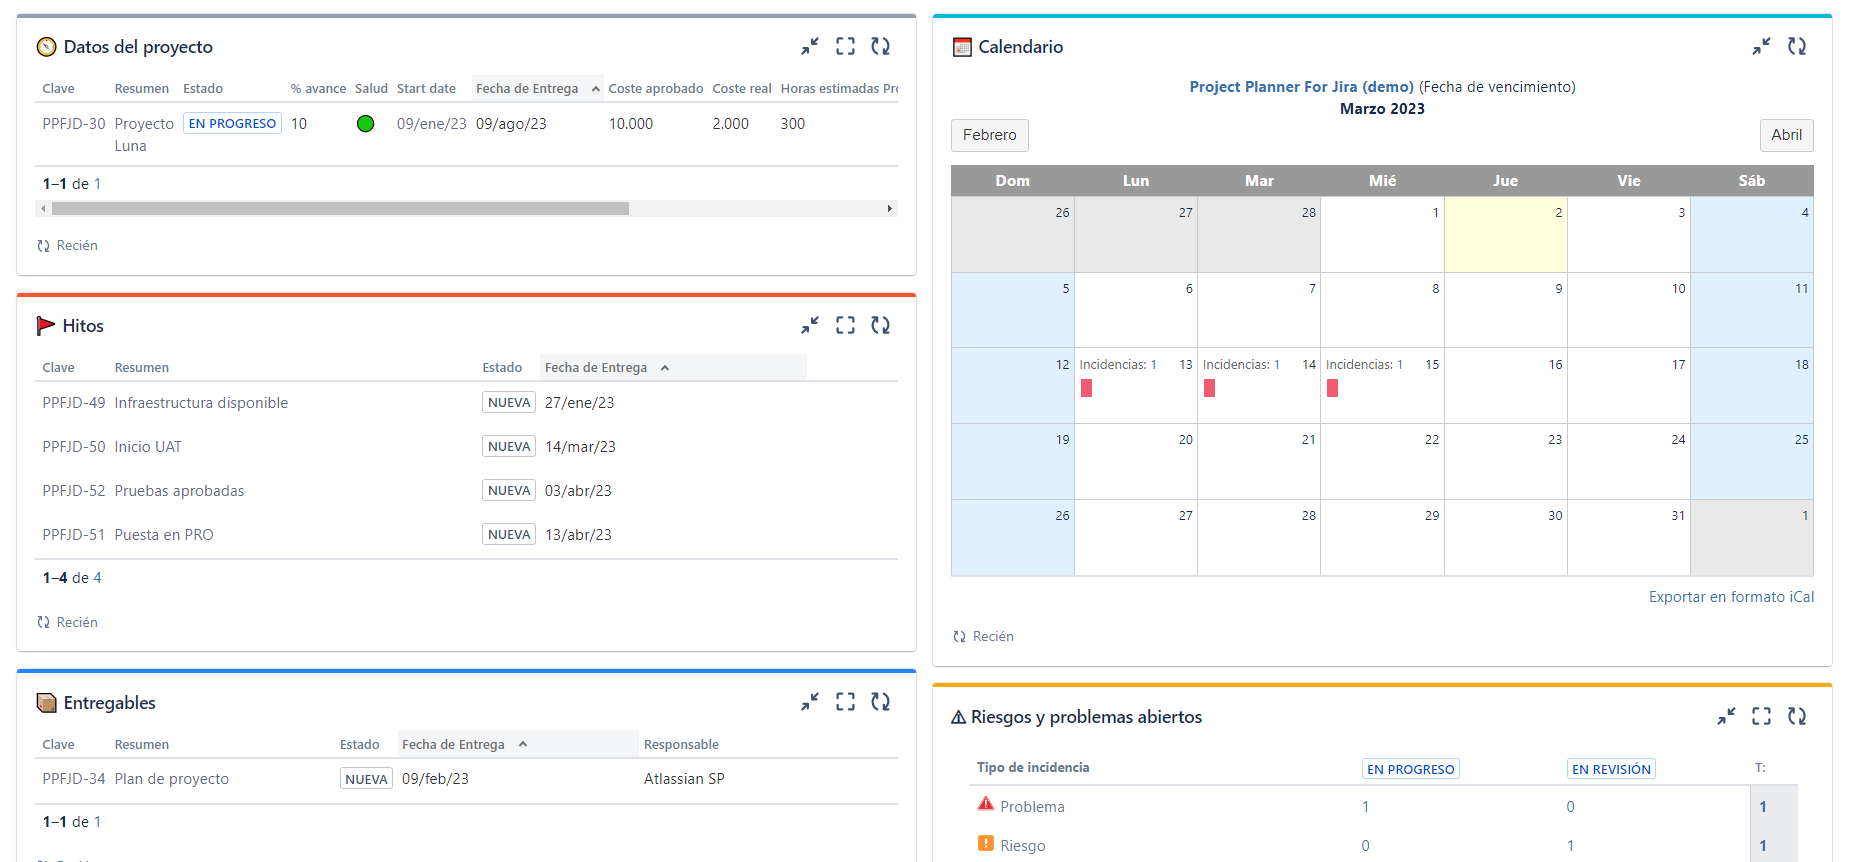 project-planner-for-jira-dashboards-visuales-y-utiles